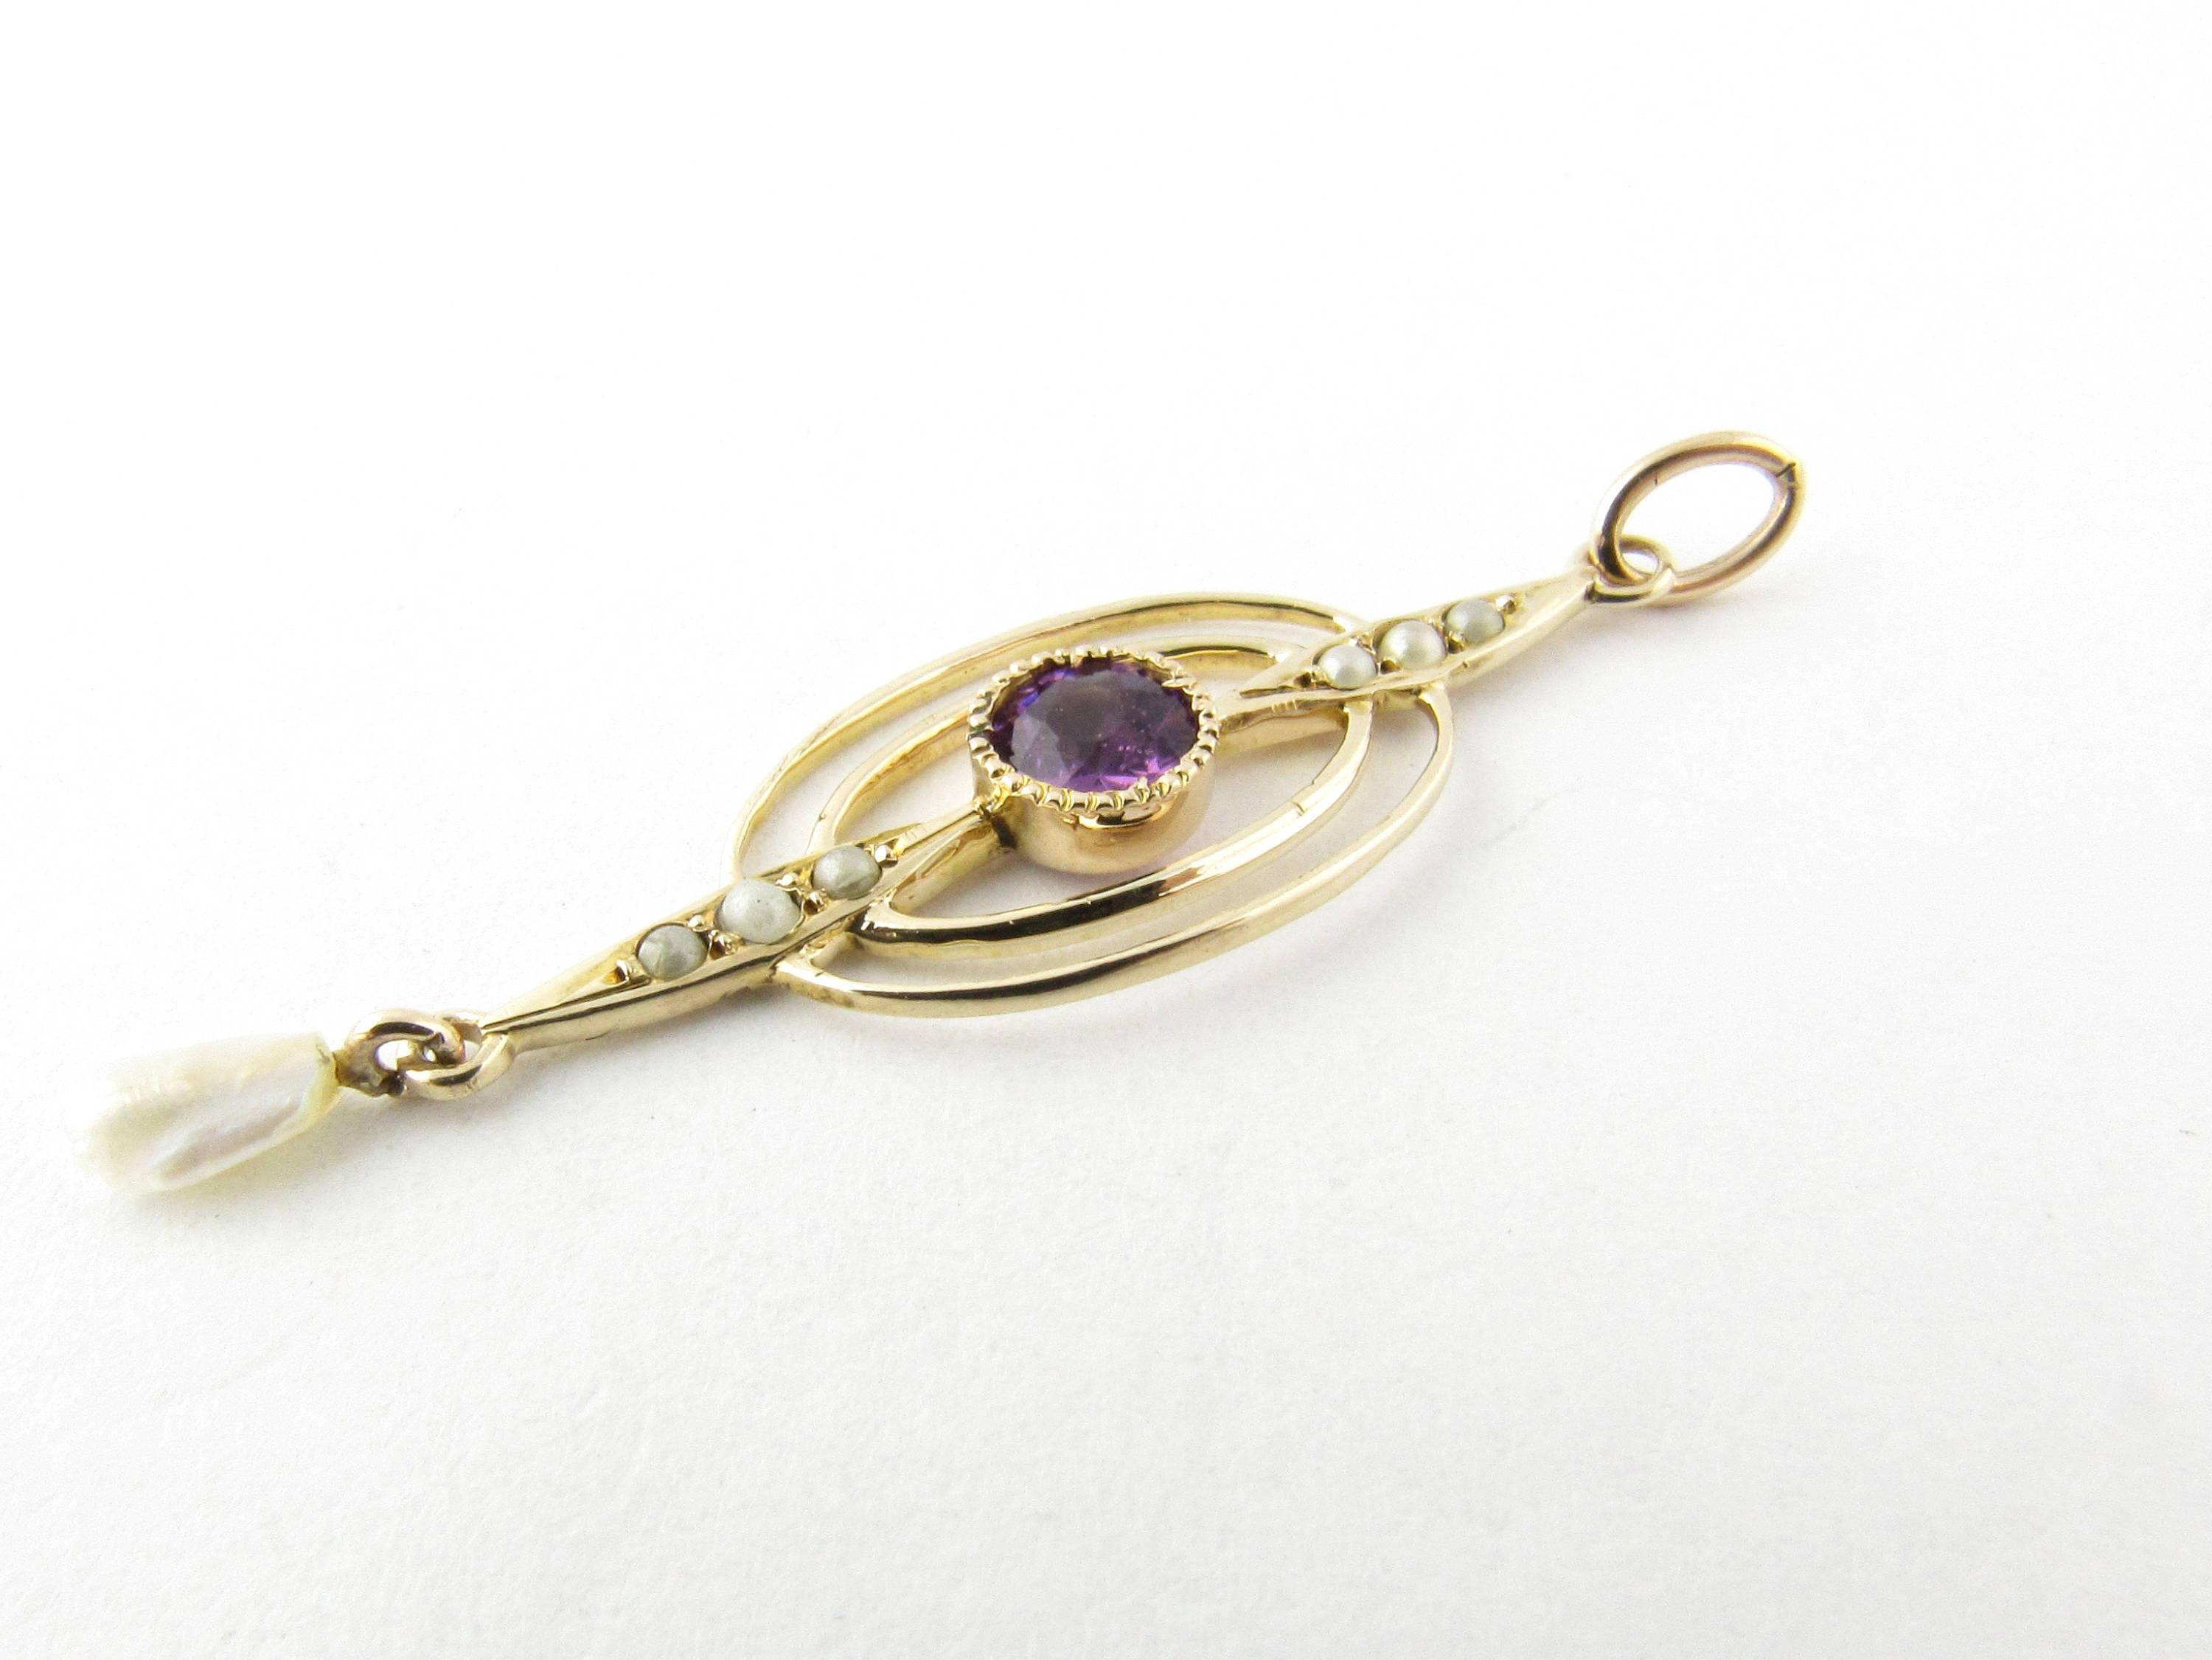 Vintage 10 Karat Yellow Gold Amethyst and Pearl Pendant-

This delicate pendant features on round amethyst (5 mm) and accented with six seed pearls and one dangling fresh water pearl. Beautifully detailed in 10K yellow gold. 
Size: 33 mm x 12 mm